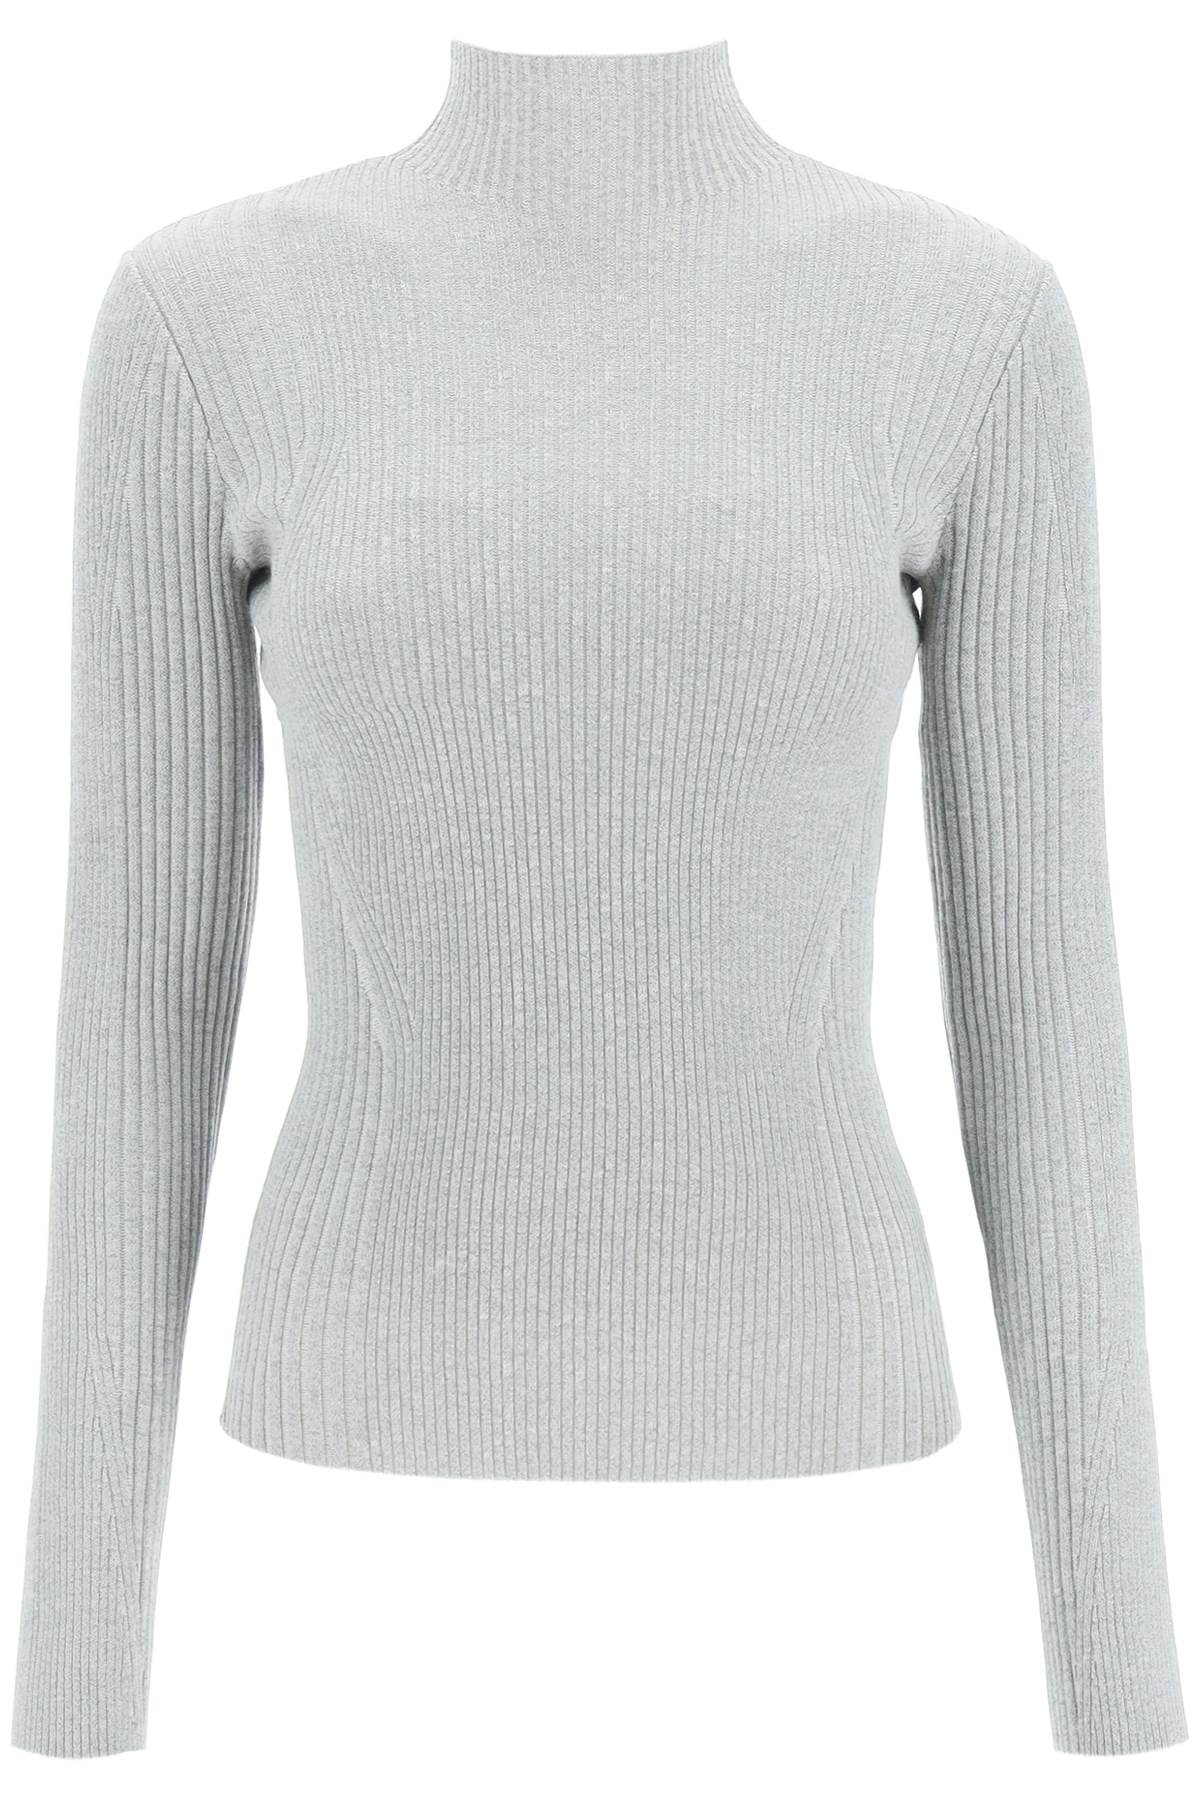 Dion Lee Light Reflective Rib Knit Top